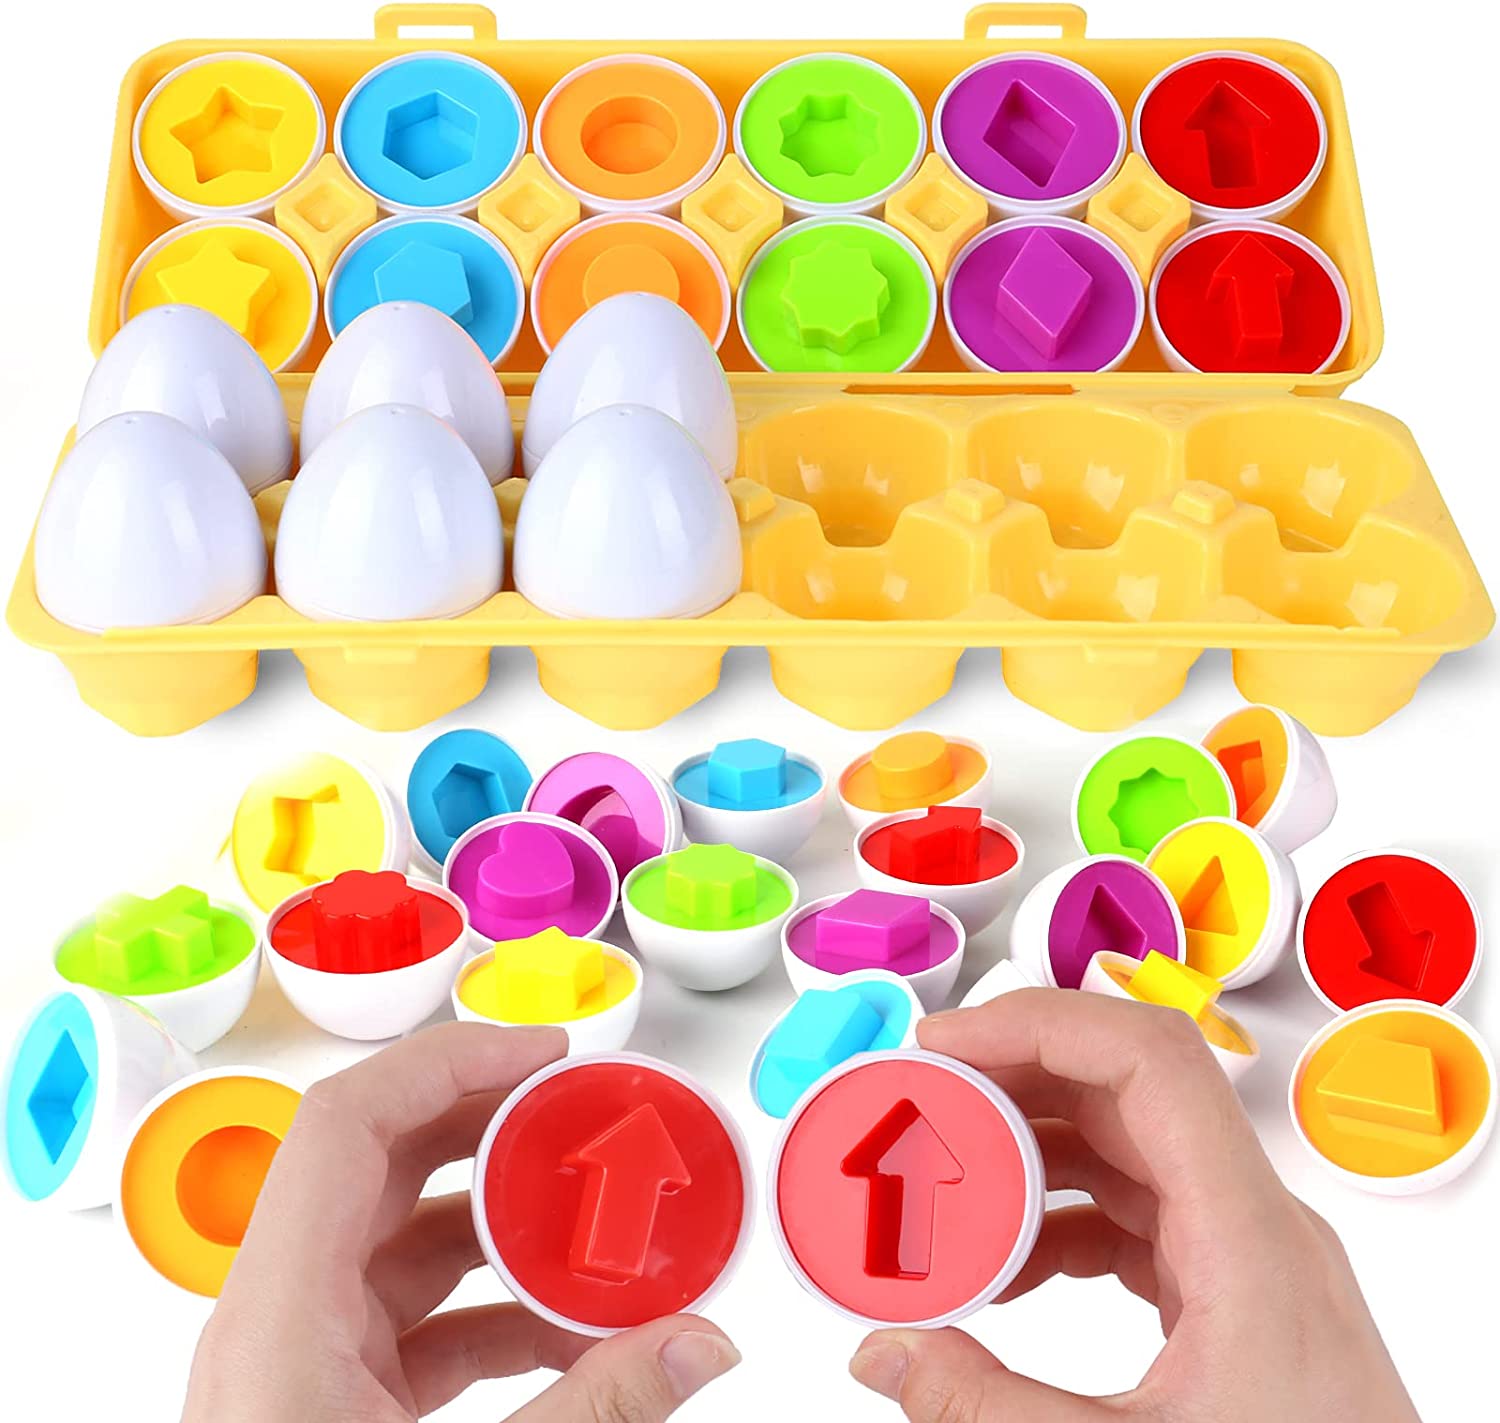 12PCS Montessori Education Early Learning Puzzle Geometric Shape Math Alphabet Game Baby Smart Plastic Material Egg Toys For Kid